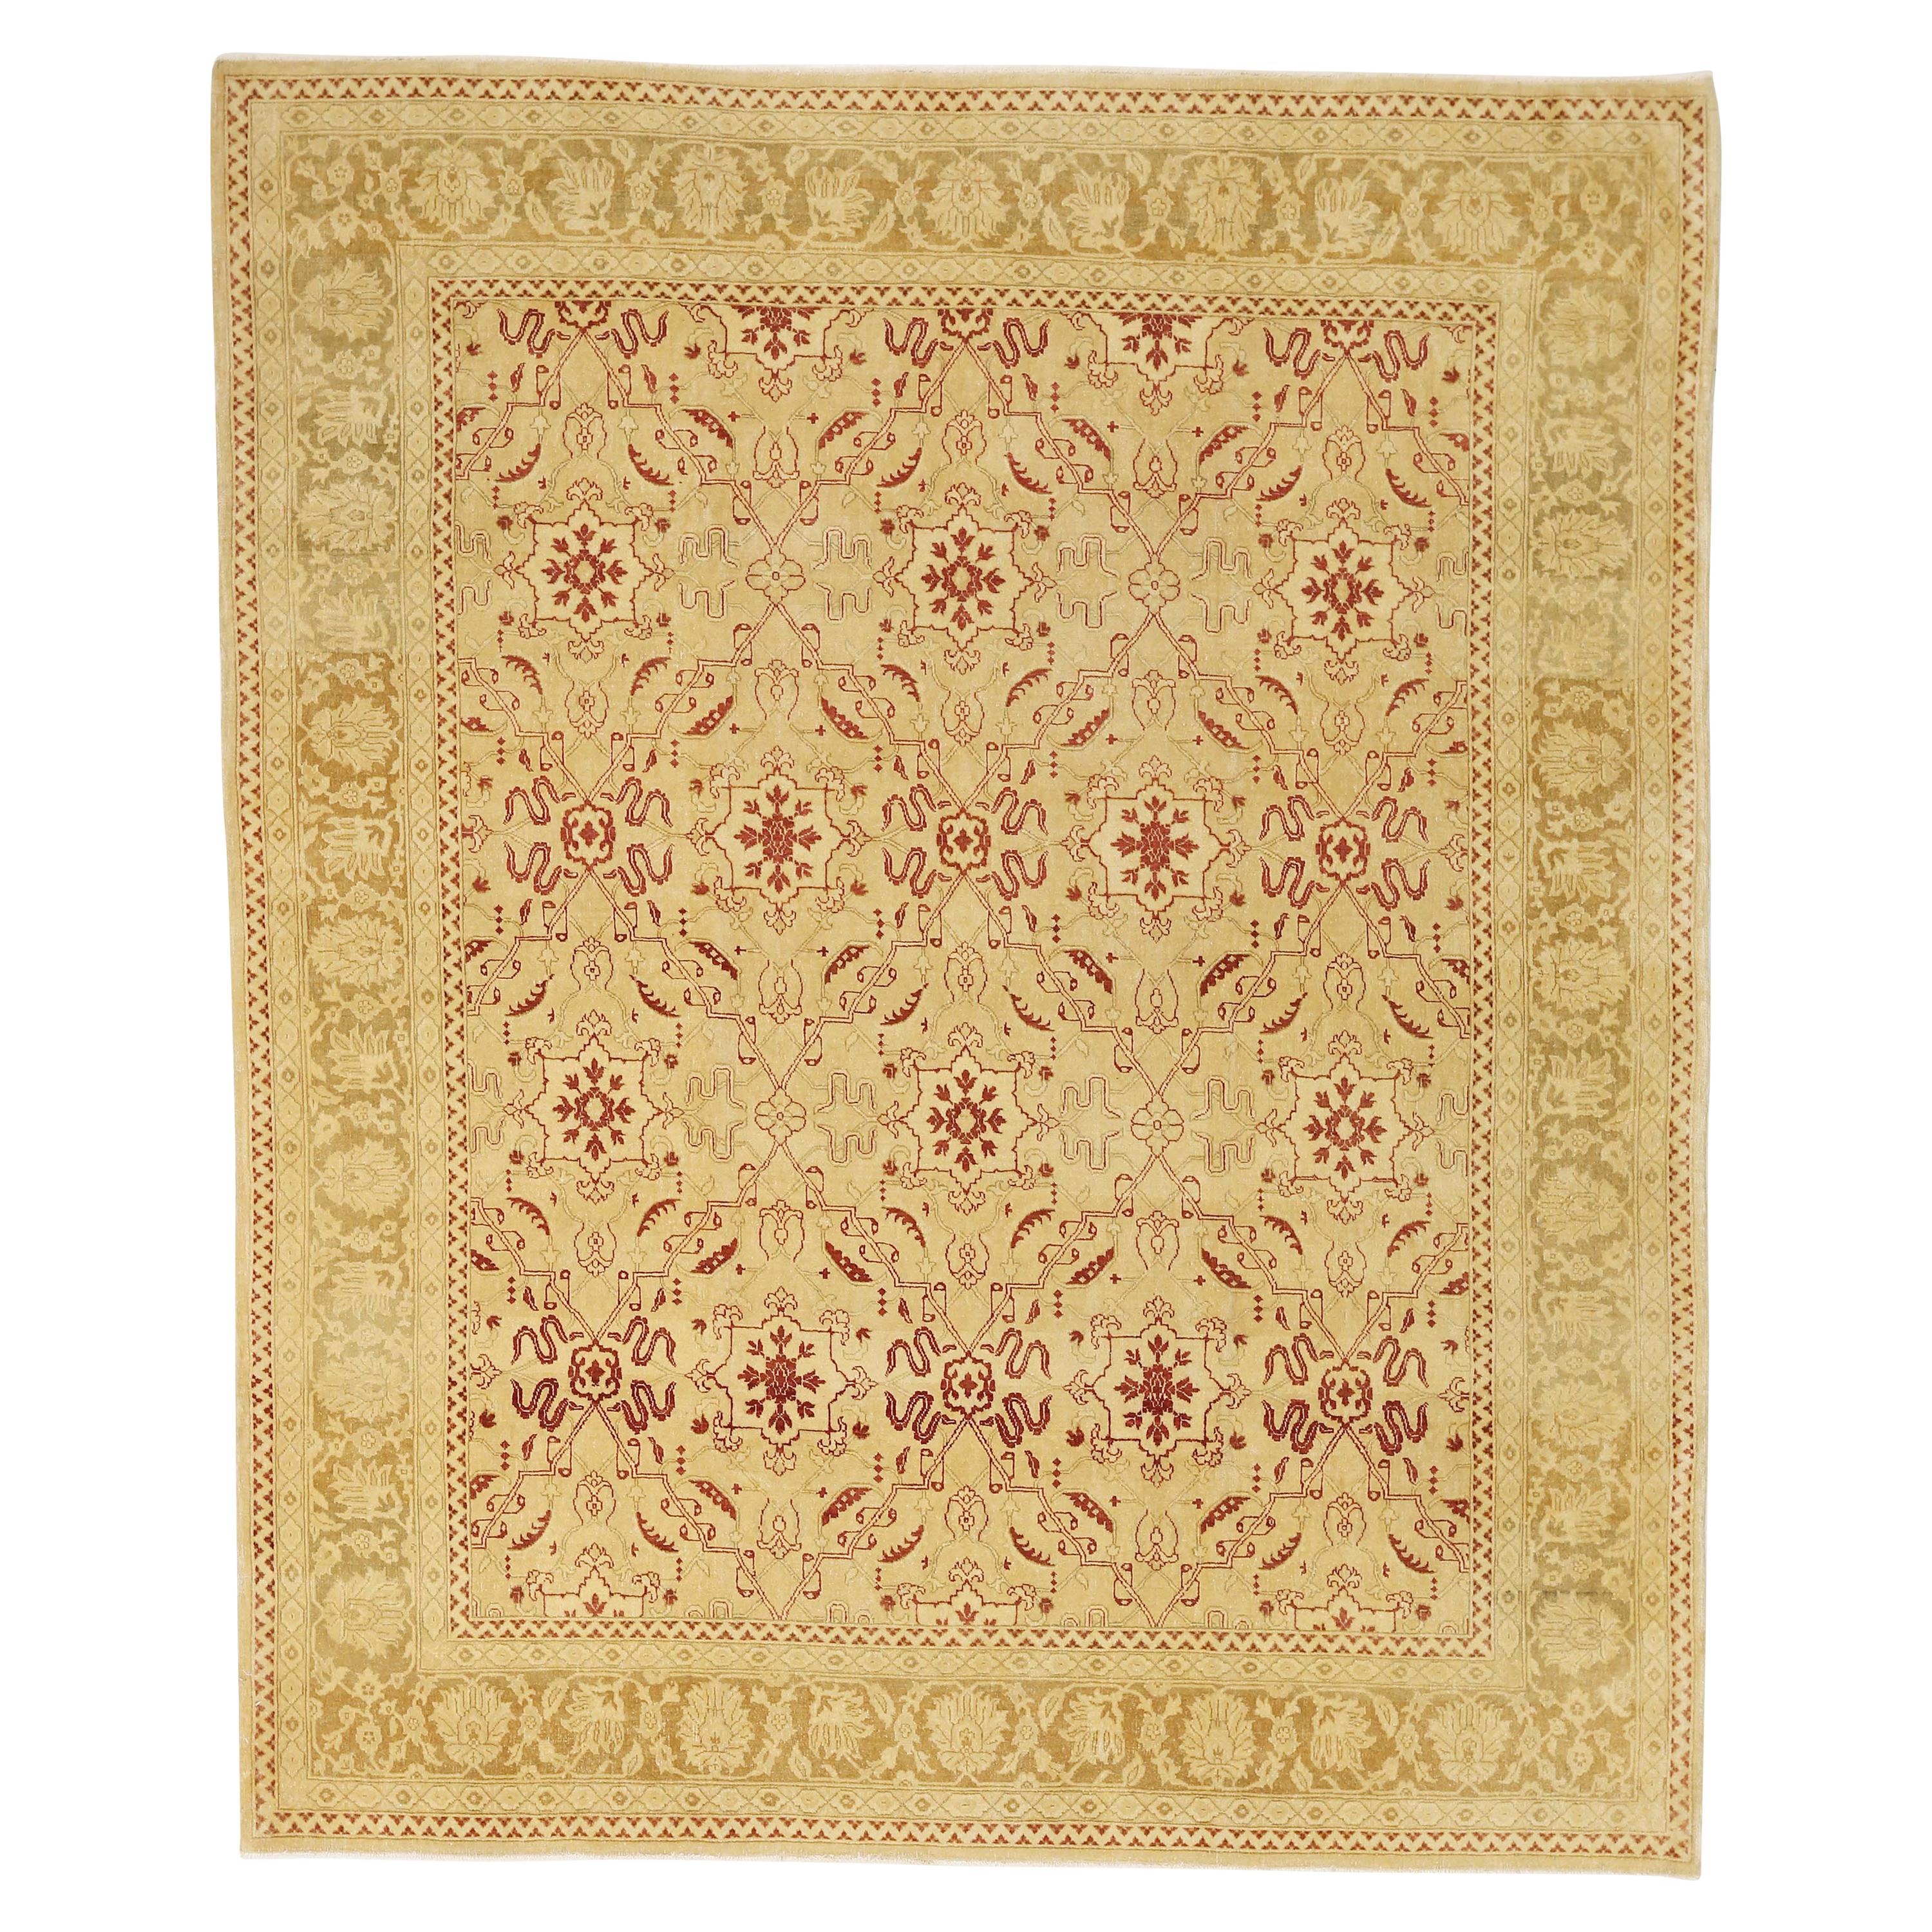 Contemporary Turkish Agra Rug with Red & Ivory Botanical Details